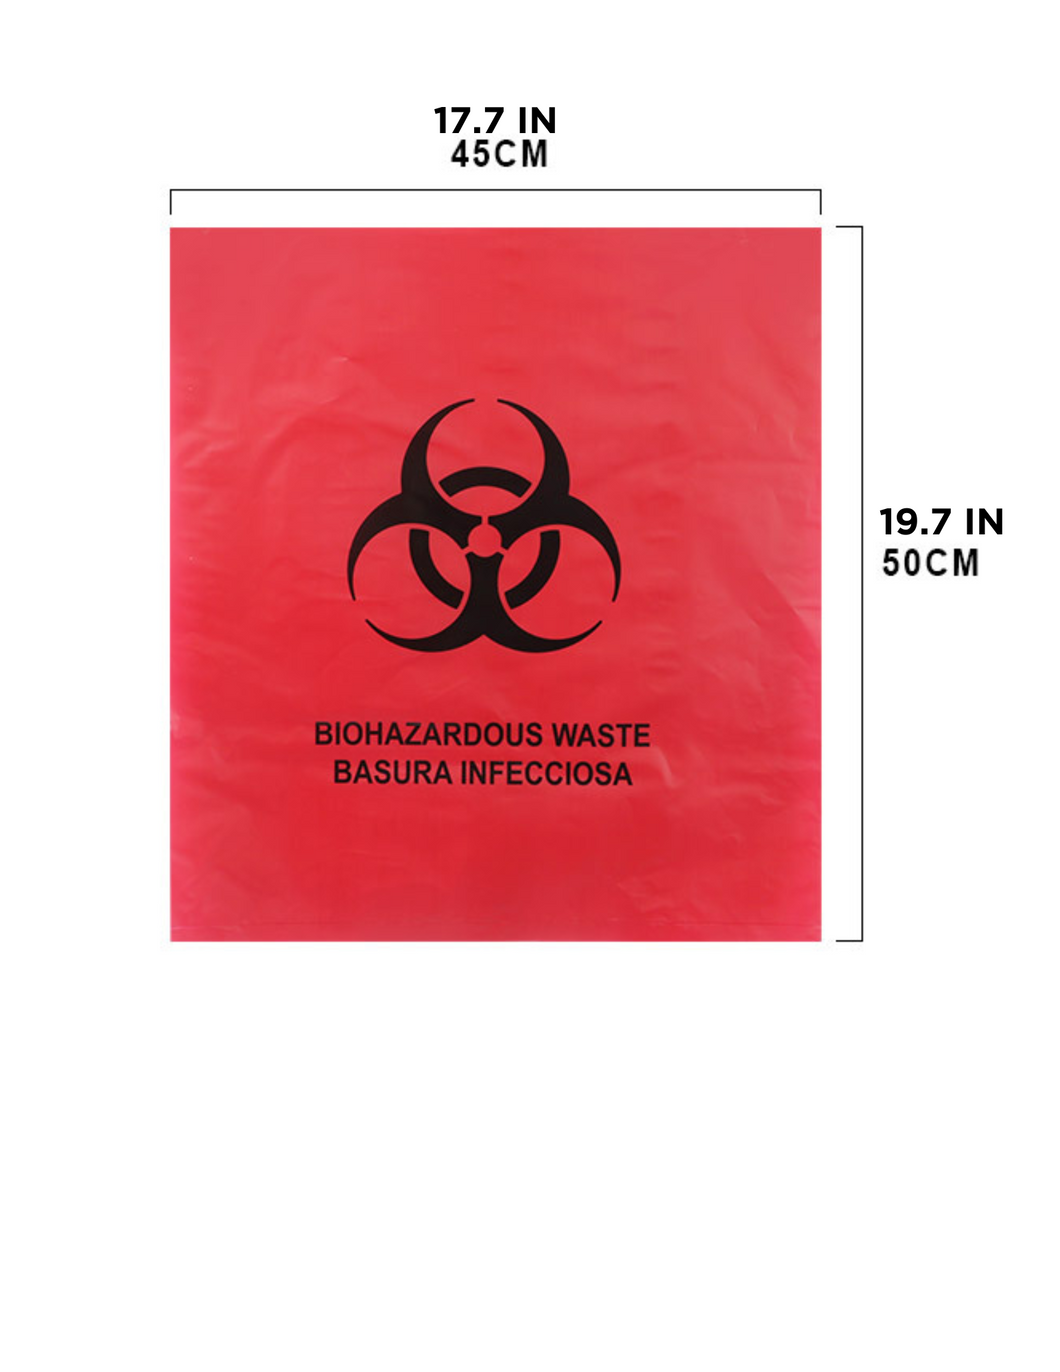 Autoclavable and Biohazard Bag (Flat Bag), Small Size